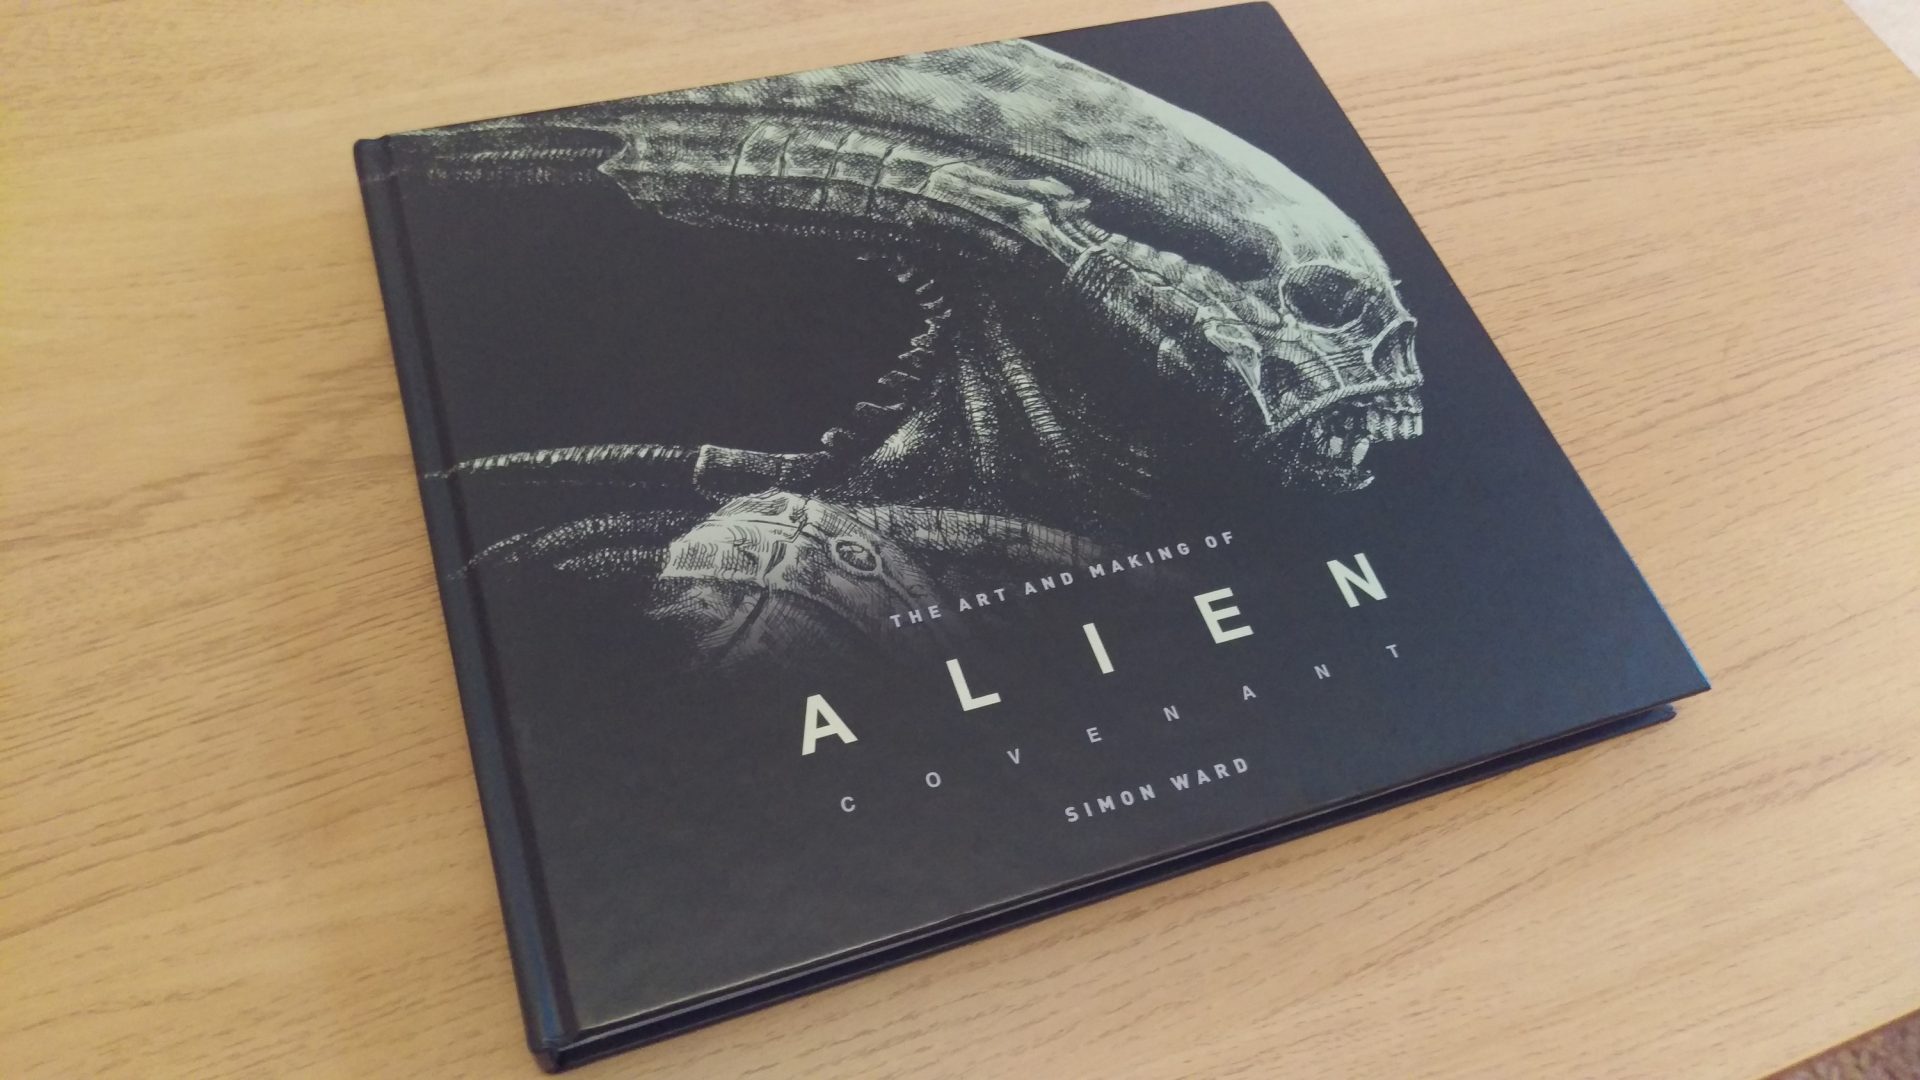 The Art and Making of Alien: Covenant Review - Alien vs. Predator Galaxy